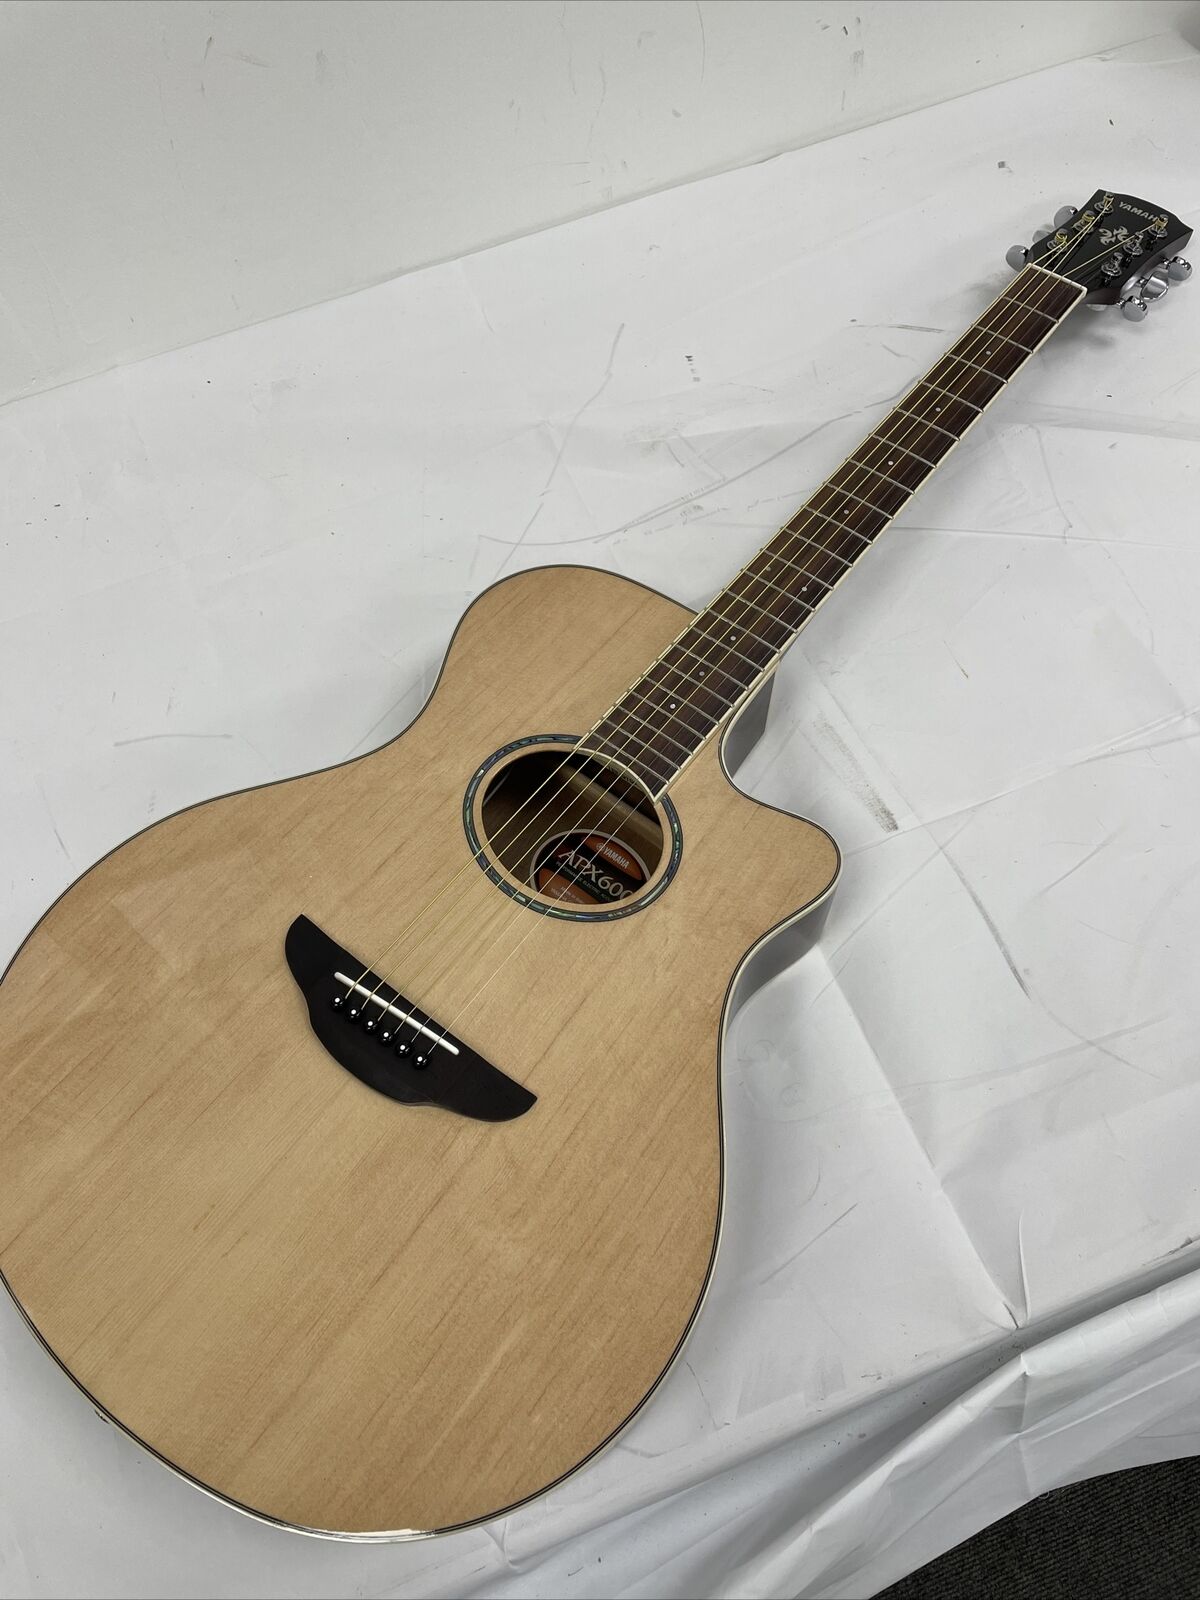 Available now on eBay UK this Yamaha APX600 Electro Acoustic Guitar - Excellent condition